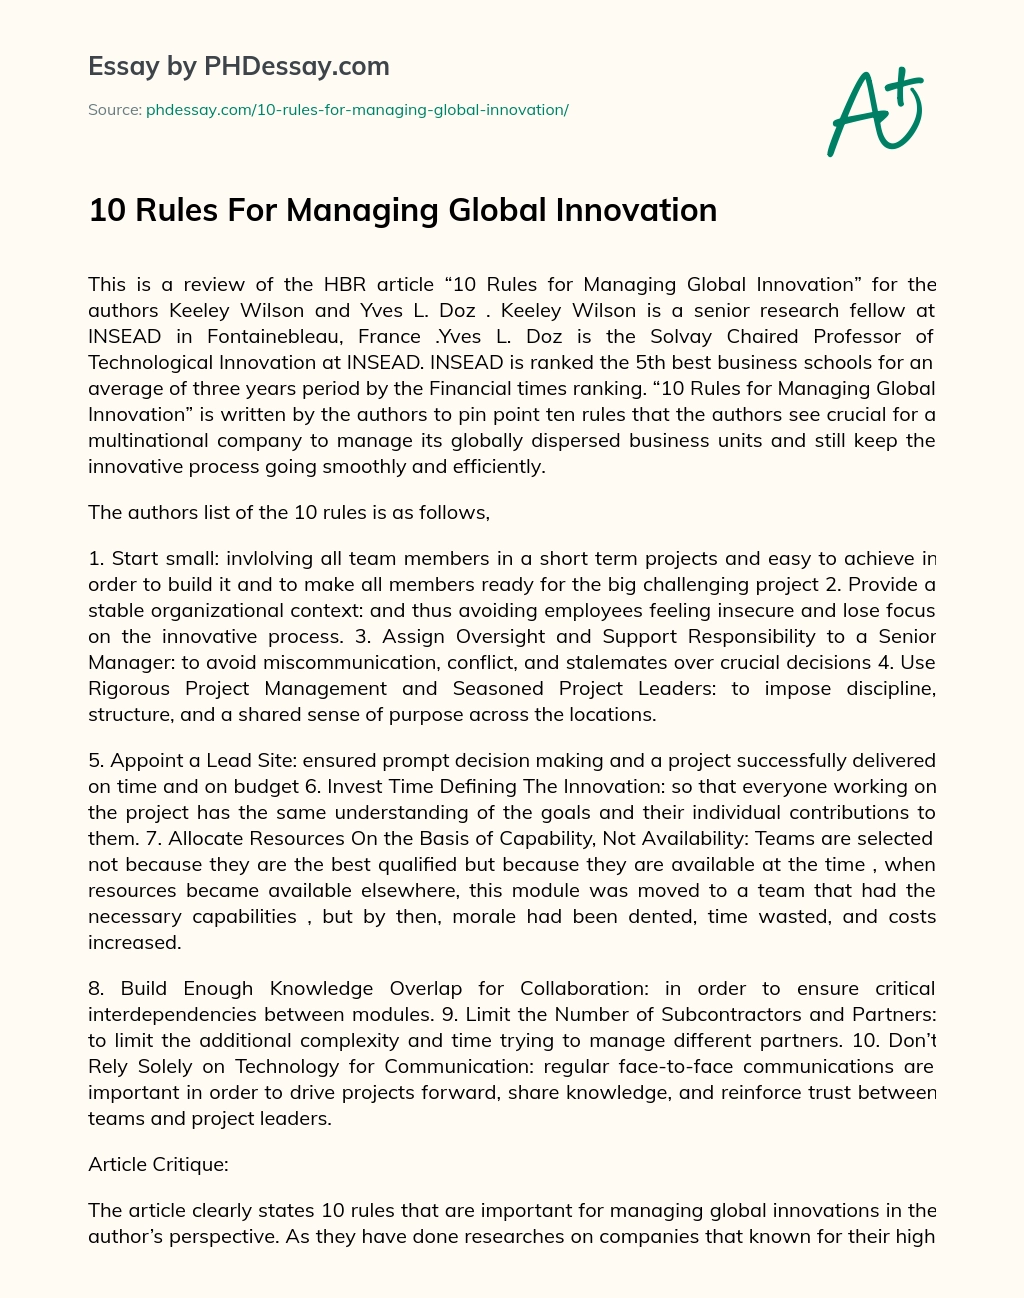 10 Rules For Managing Global Innovation essay